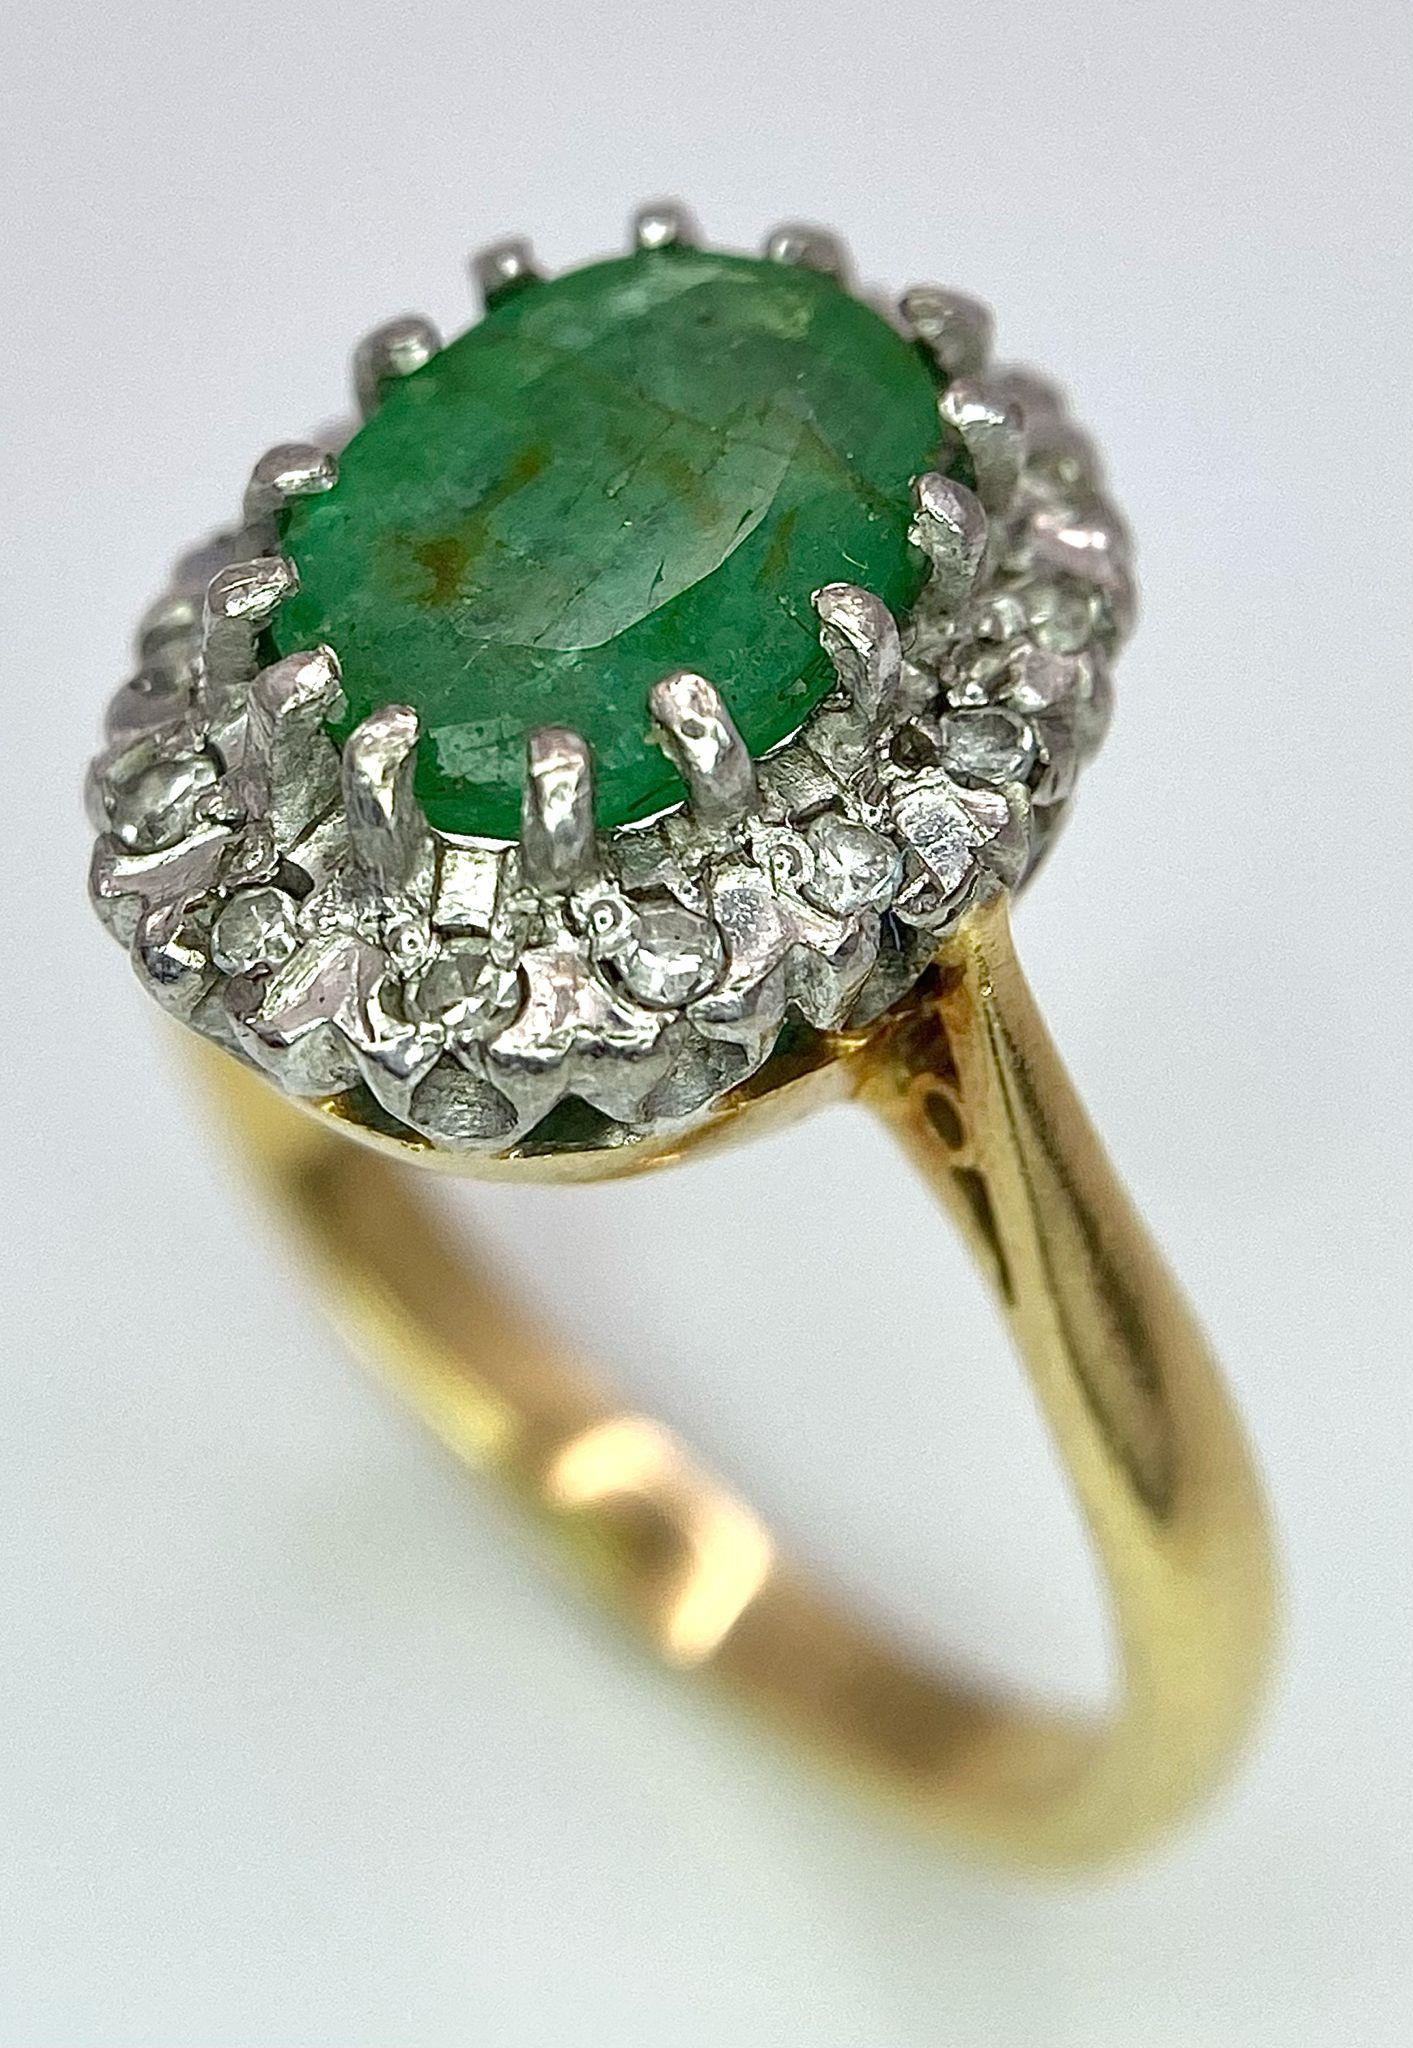 An 18K Yellow Gold, Emerald and Diamond Ring. Central 2ct emerald with a diamond surround. Size J. - Image 4 of 7